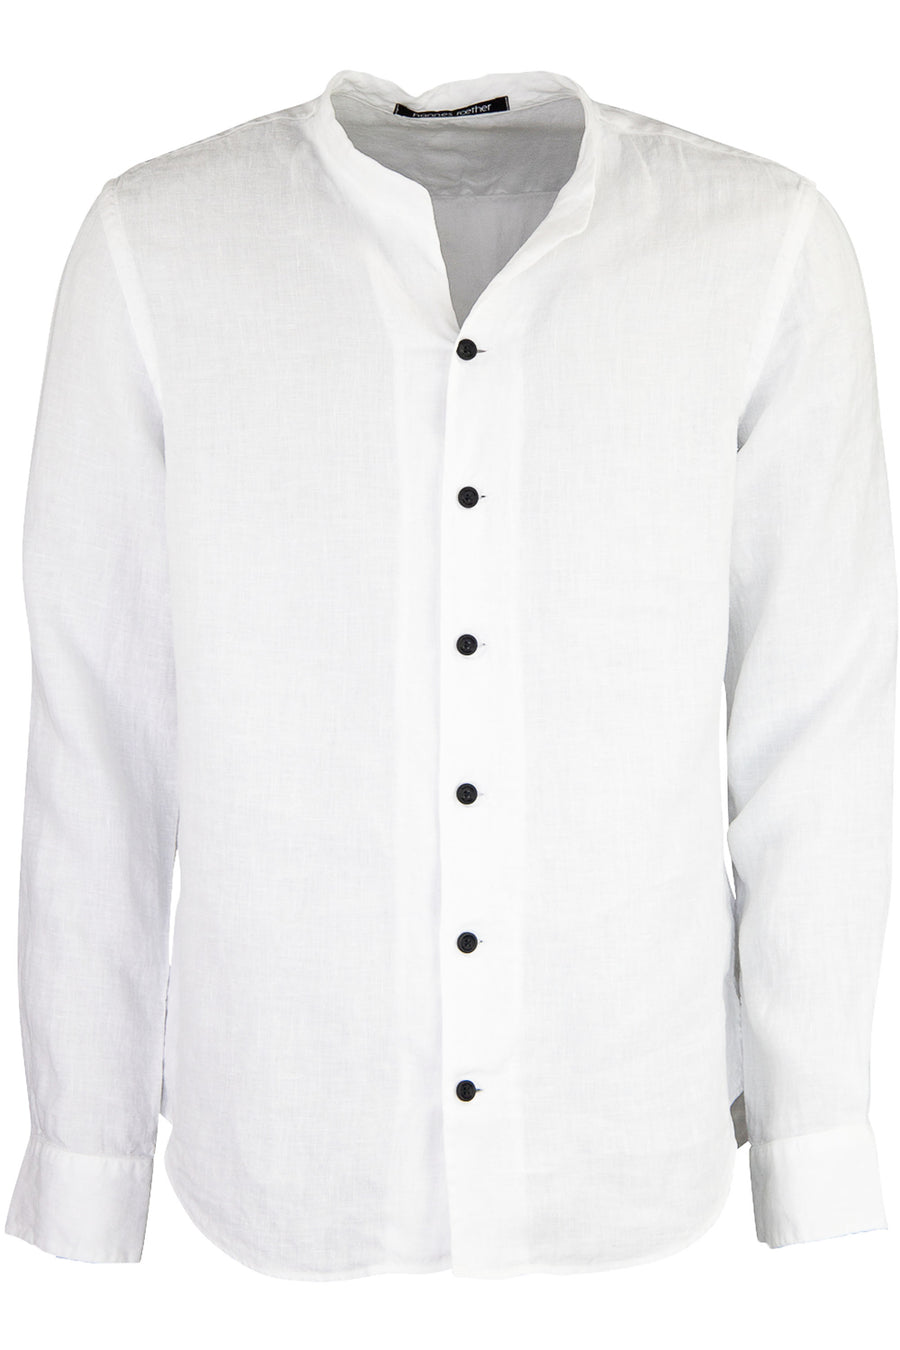 Buy the Hannes Roether Open Collar Linen Shirt in White at Intro. Spend £50 for free UK delivery. Official stockists. We ship worldwide.